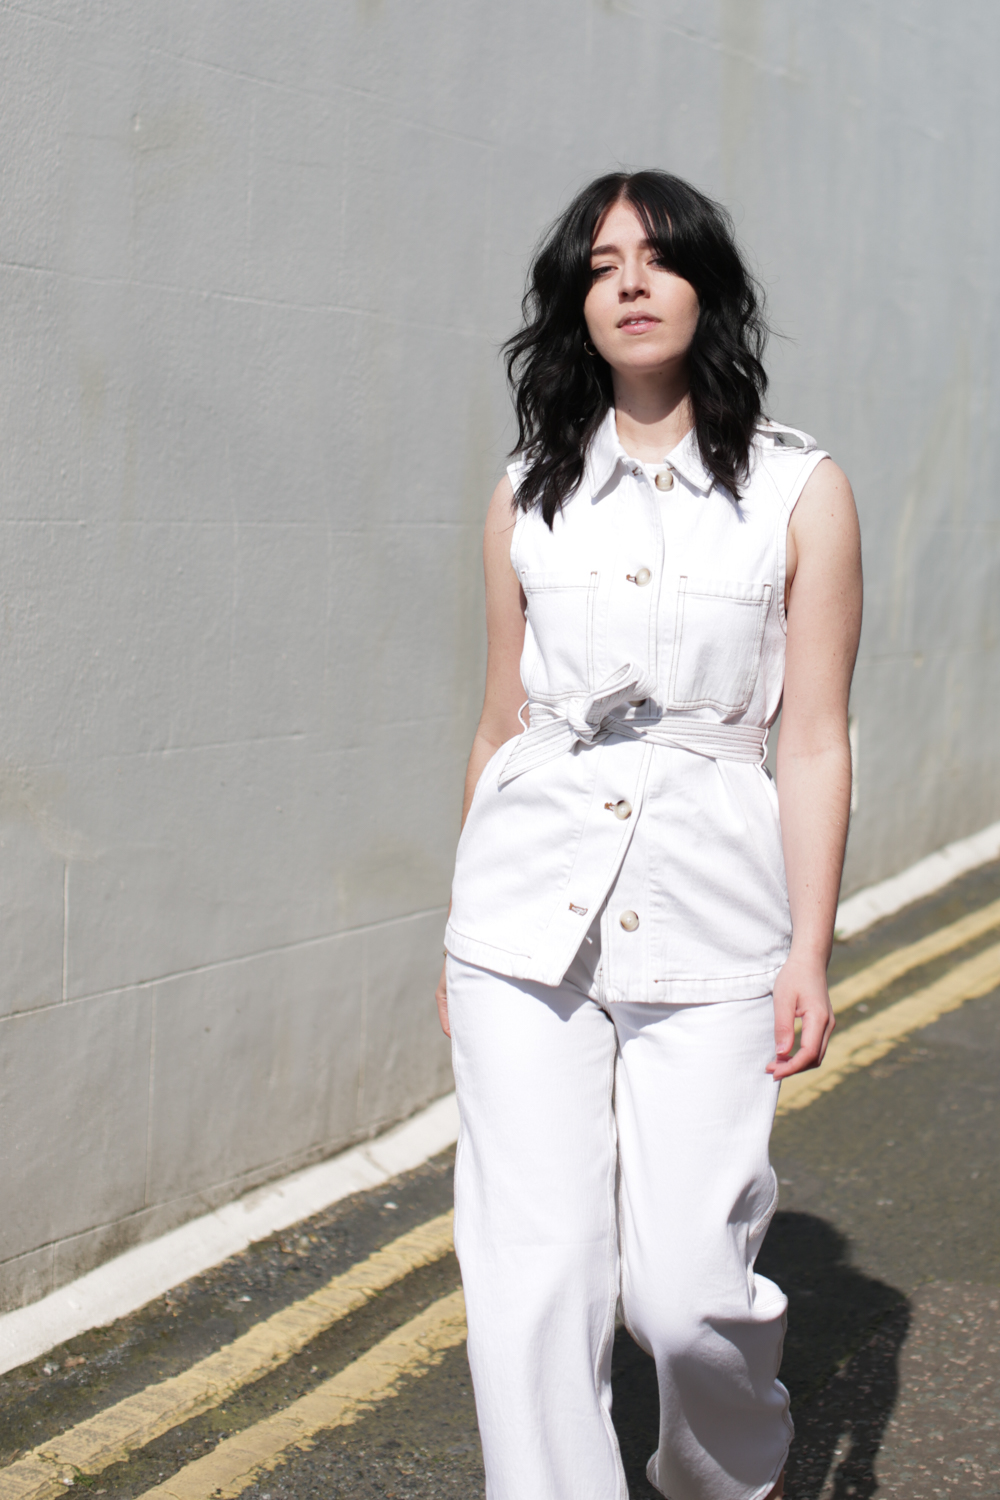 Besma wears all white denim outfit from Seventy + Mochi